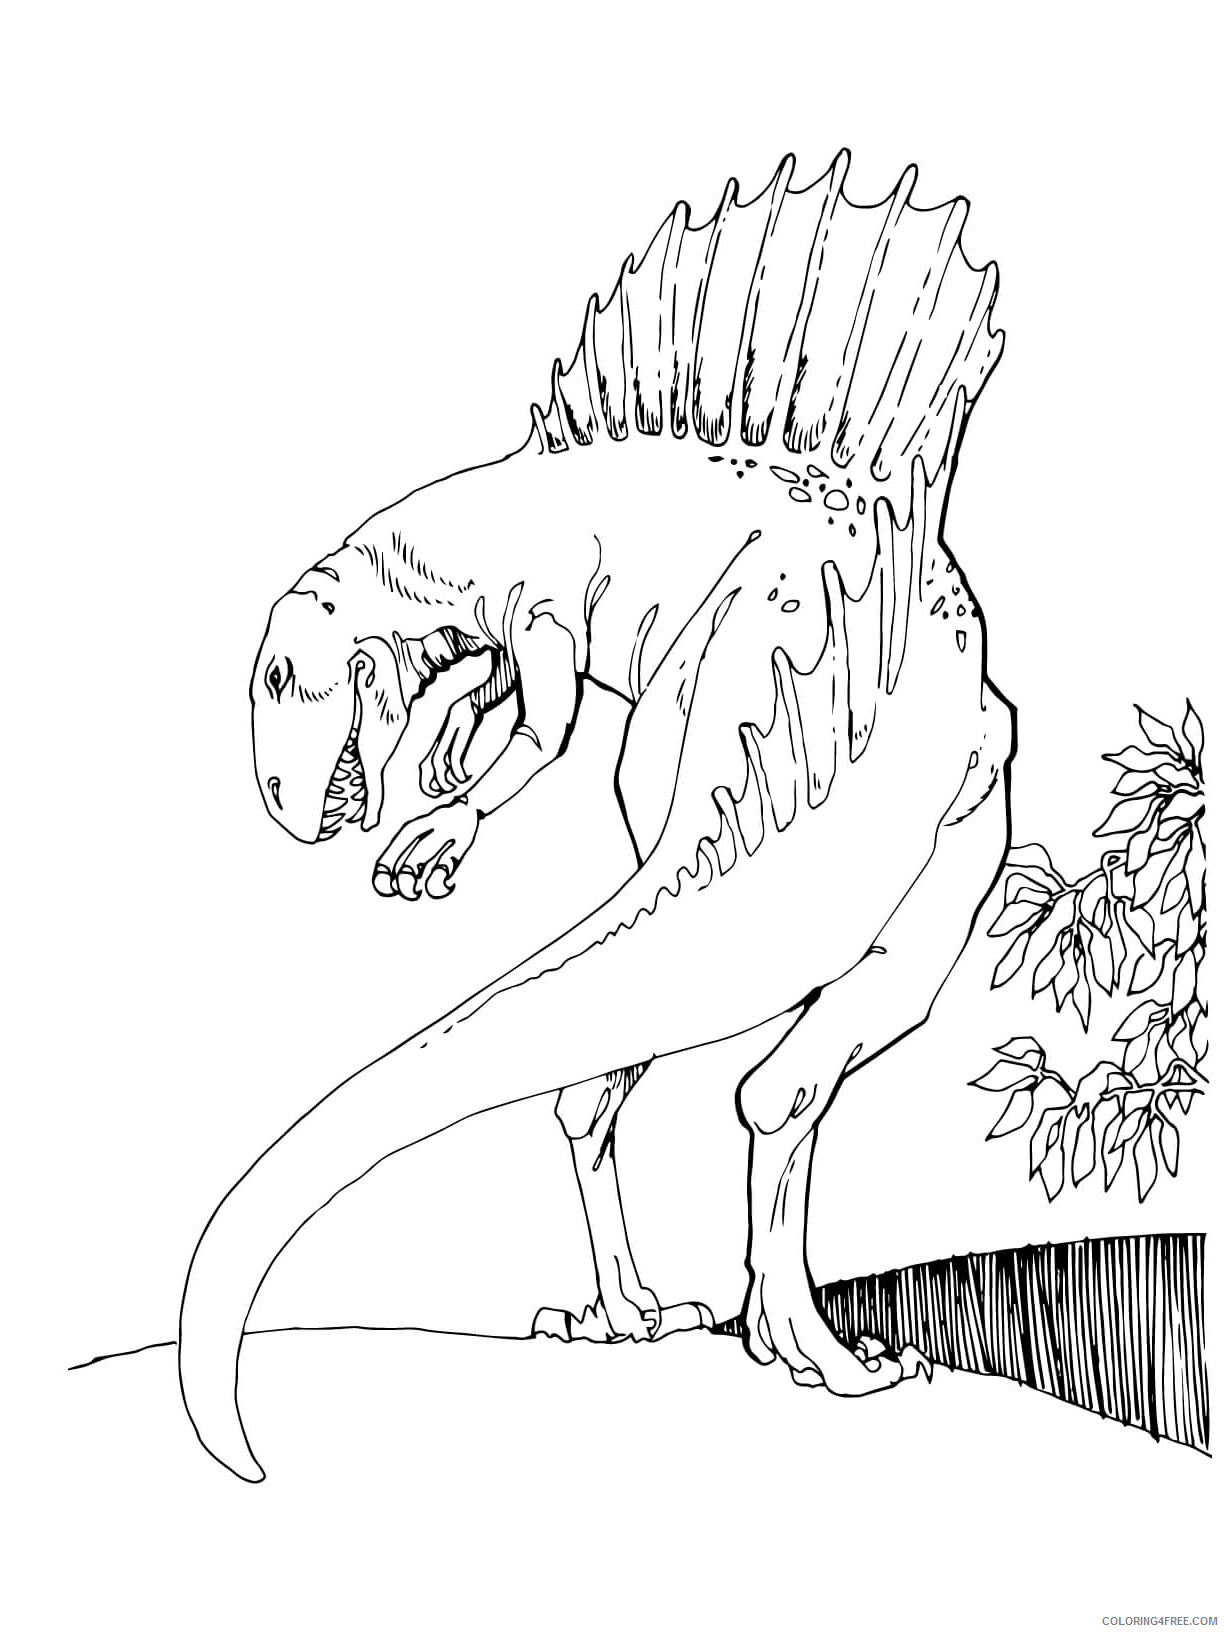 Jurassic World Coloring Pages for boys Dino Jurassic World Printable 2020 0508 Coloring4free